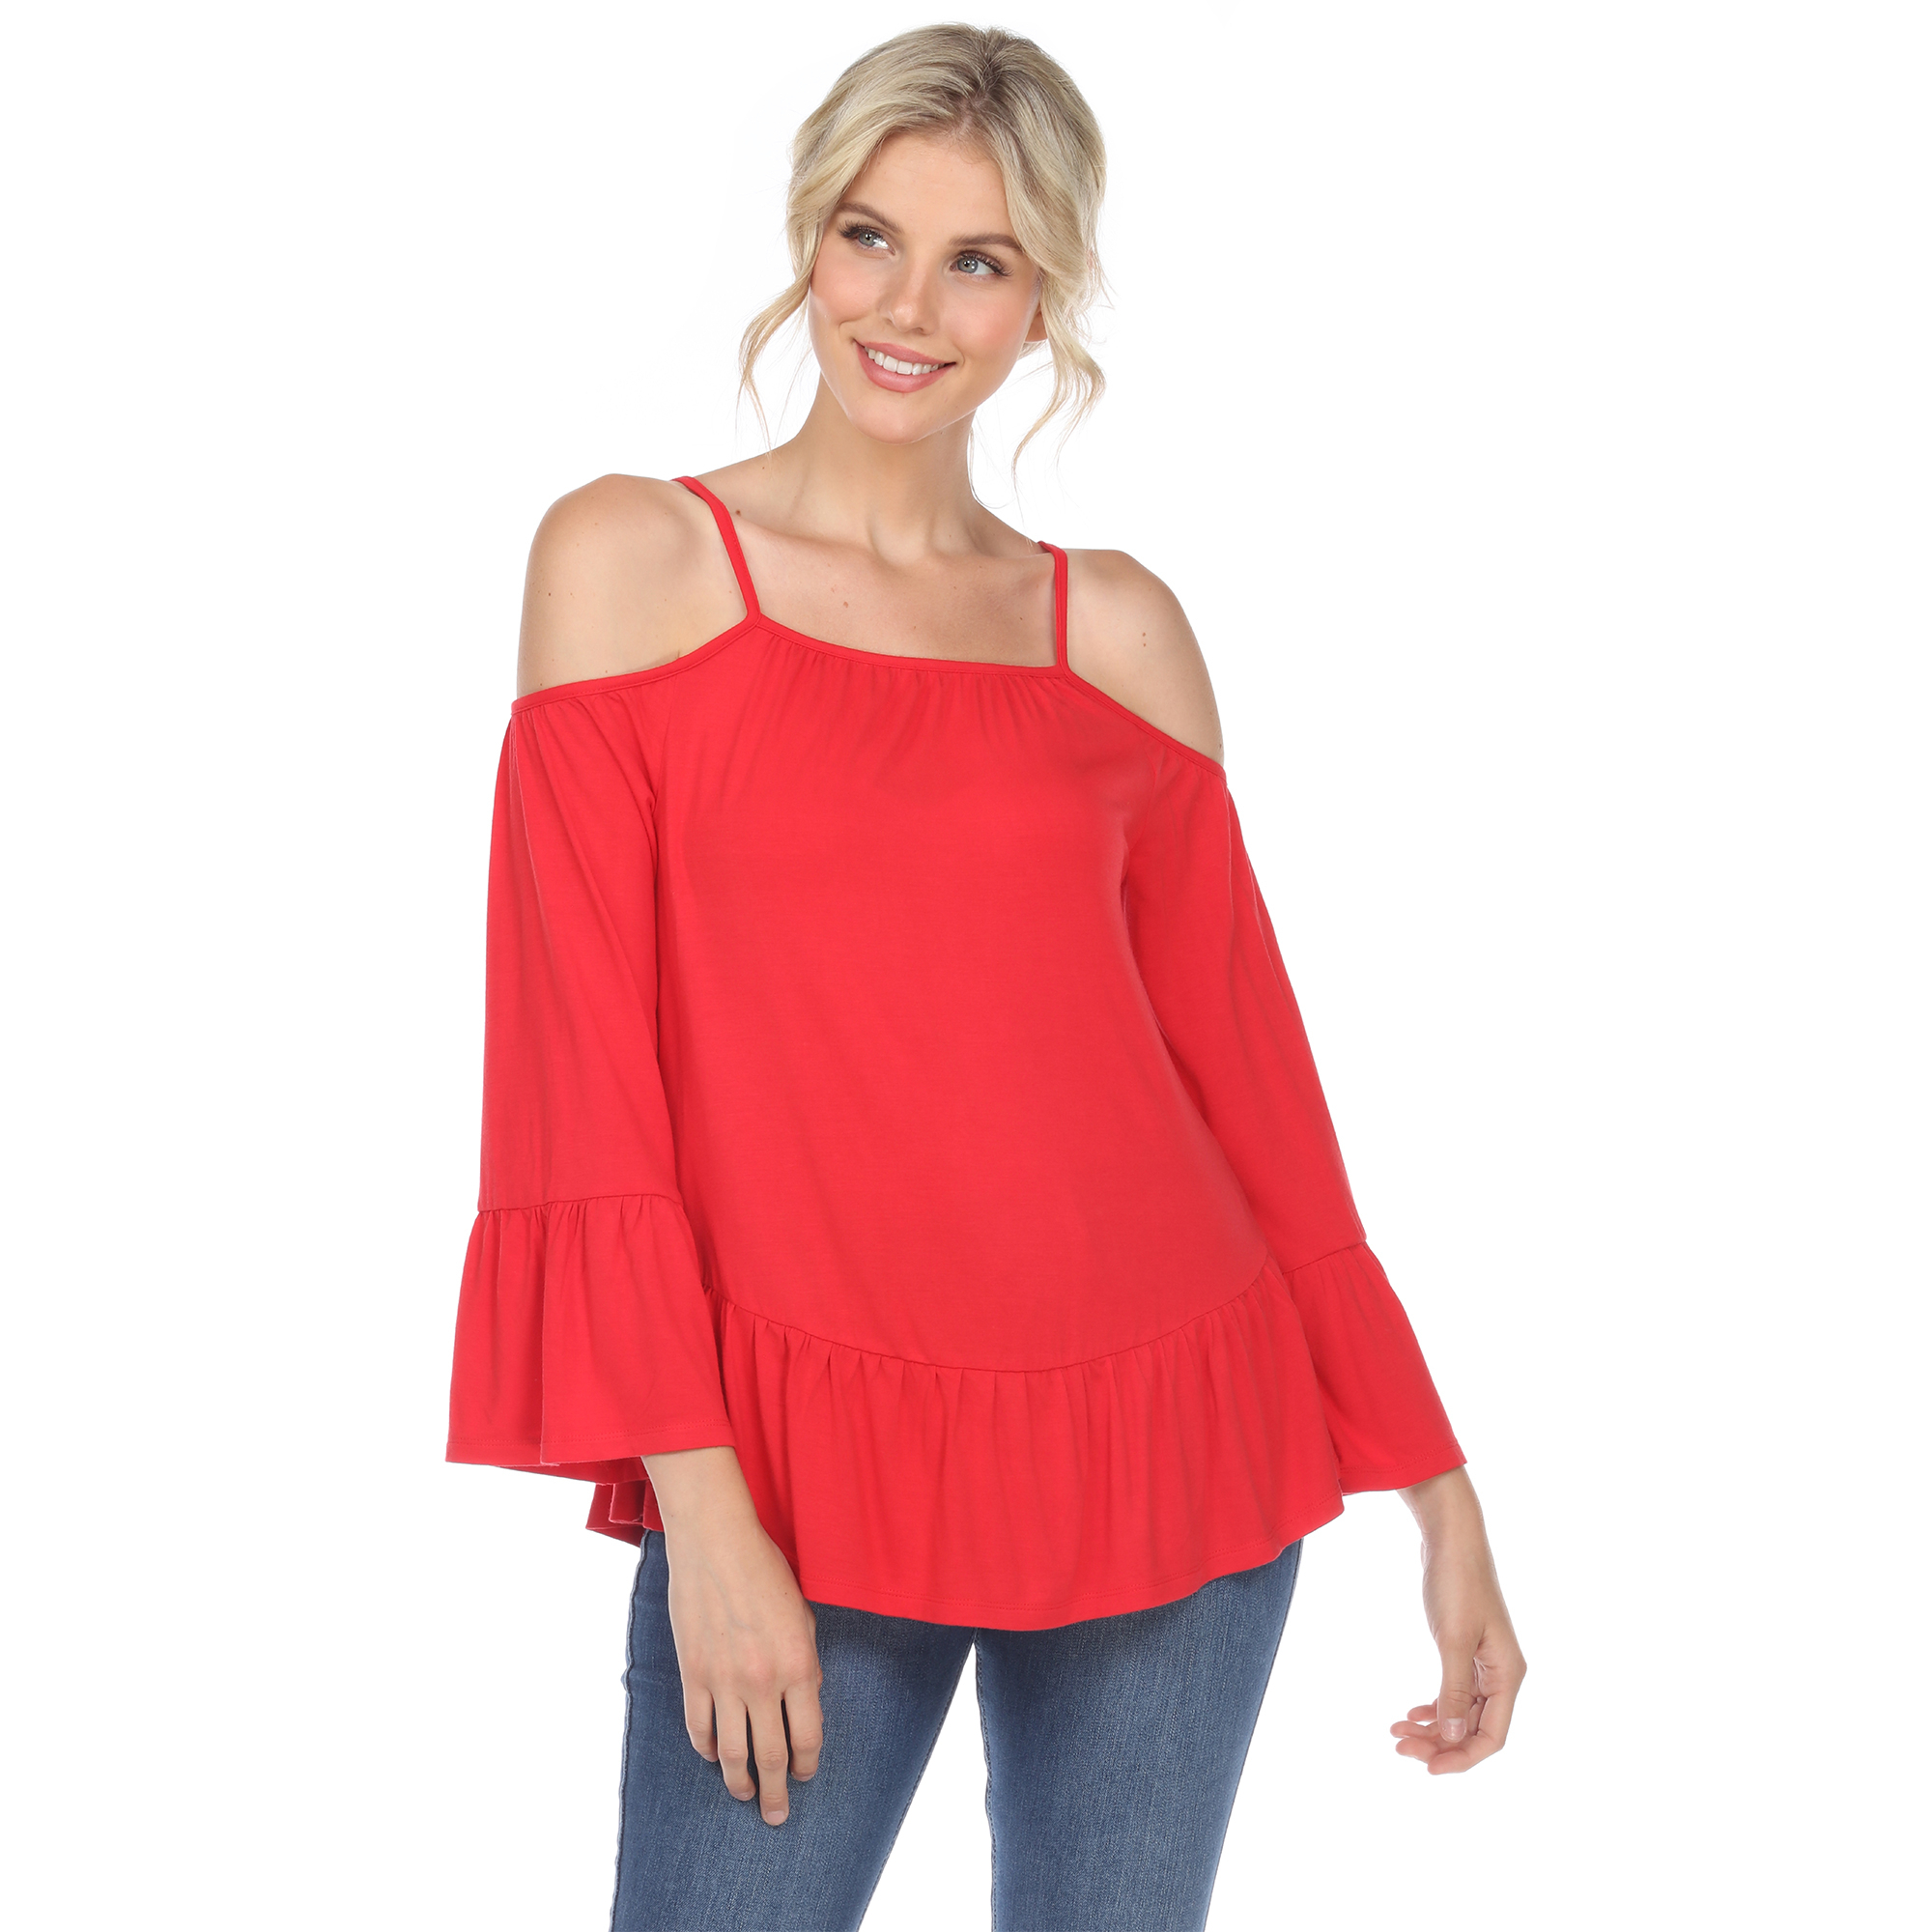 White Mark Women's Cold Shoulder Ruffle Sleeve Top - Red, 2X